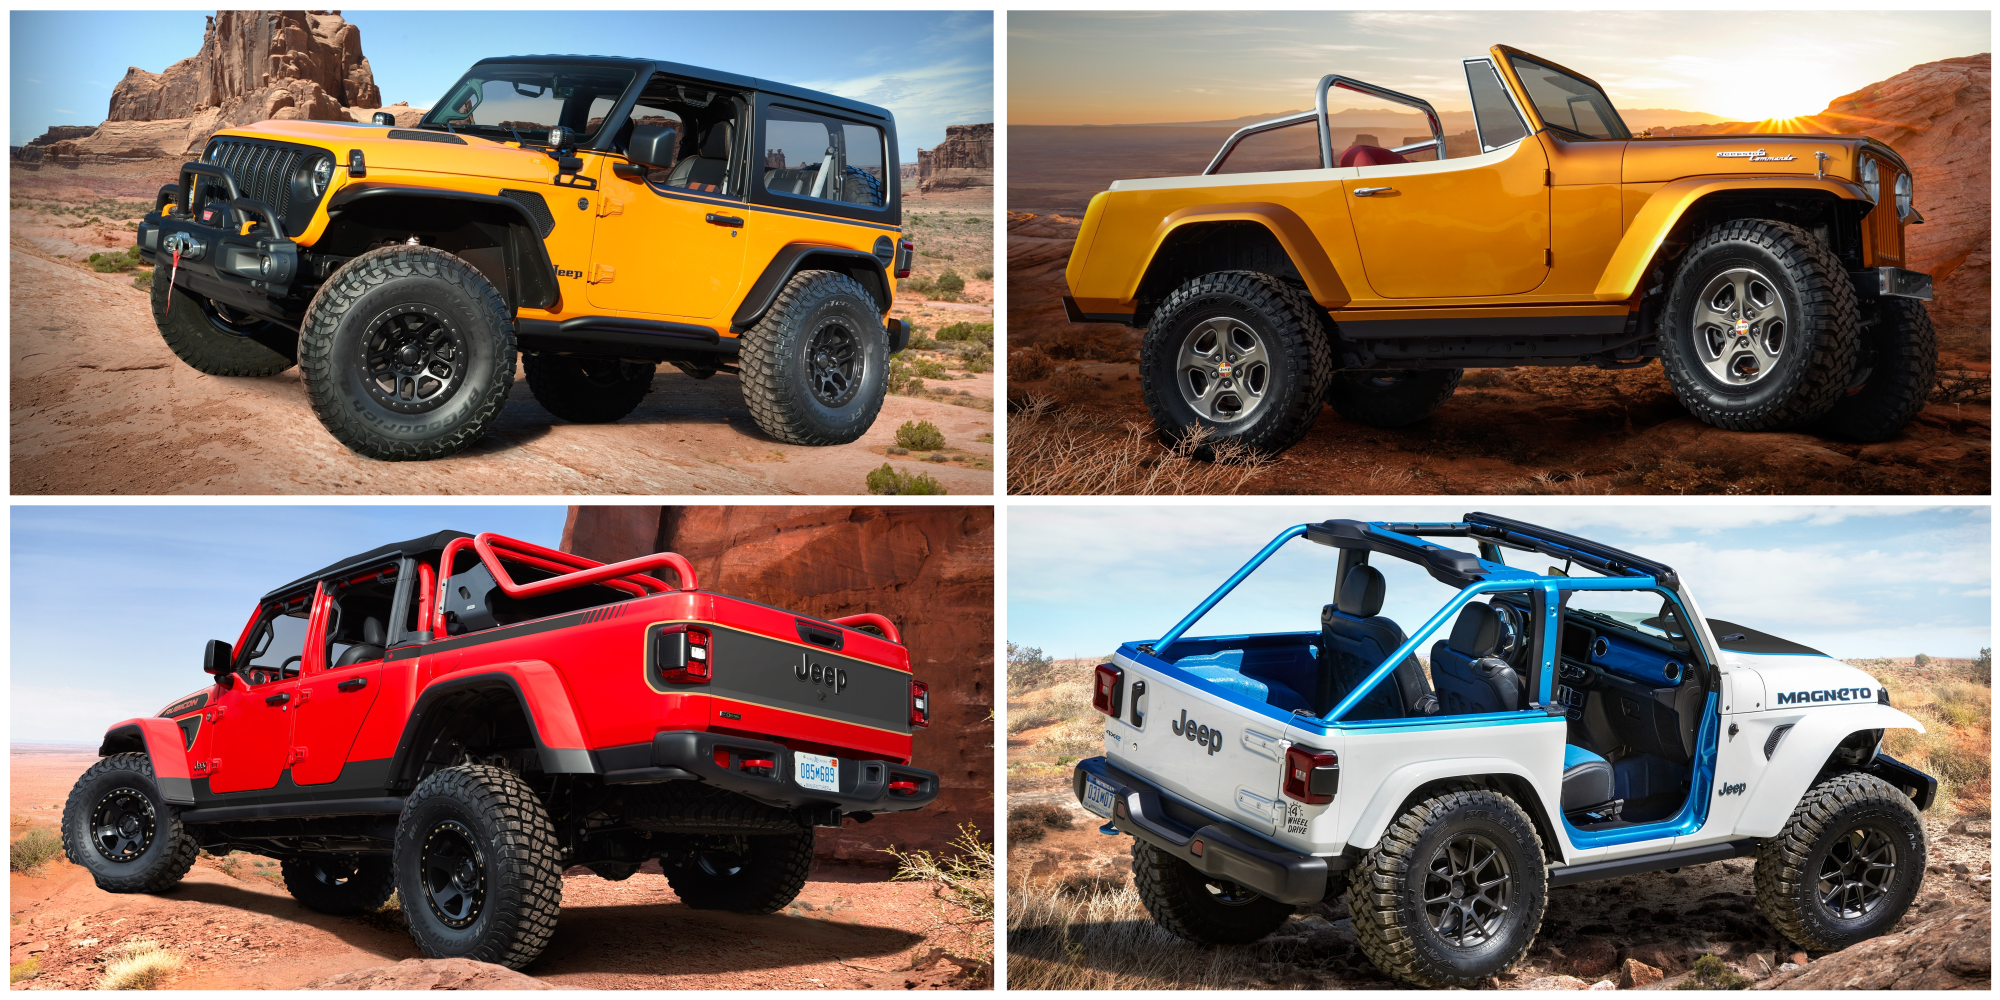 2021 Easter Jeep Safari to Bring 4 New, 3 Older Concepts to Moab